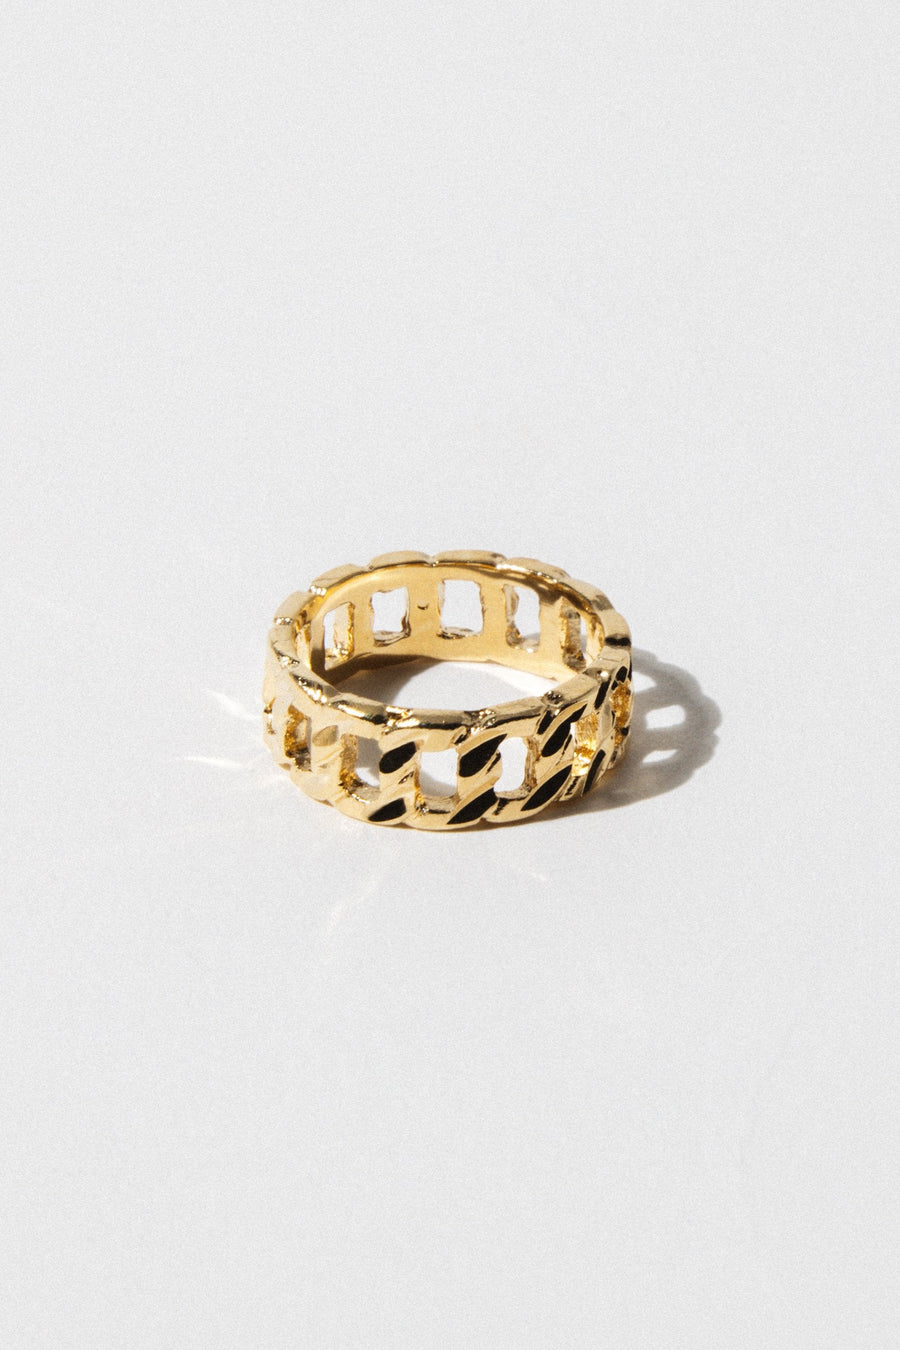 Sparrow Jewelry US 7 / Gold Jada Link Ring